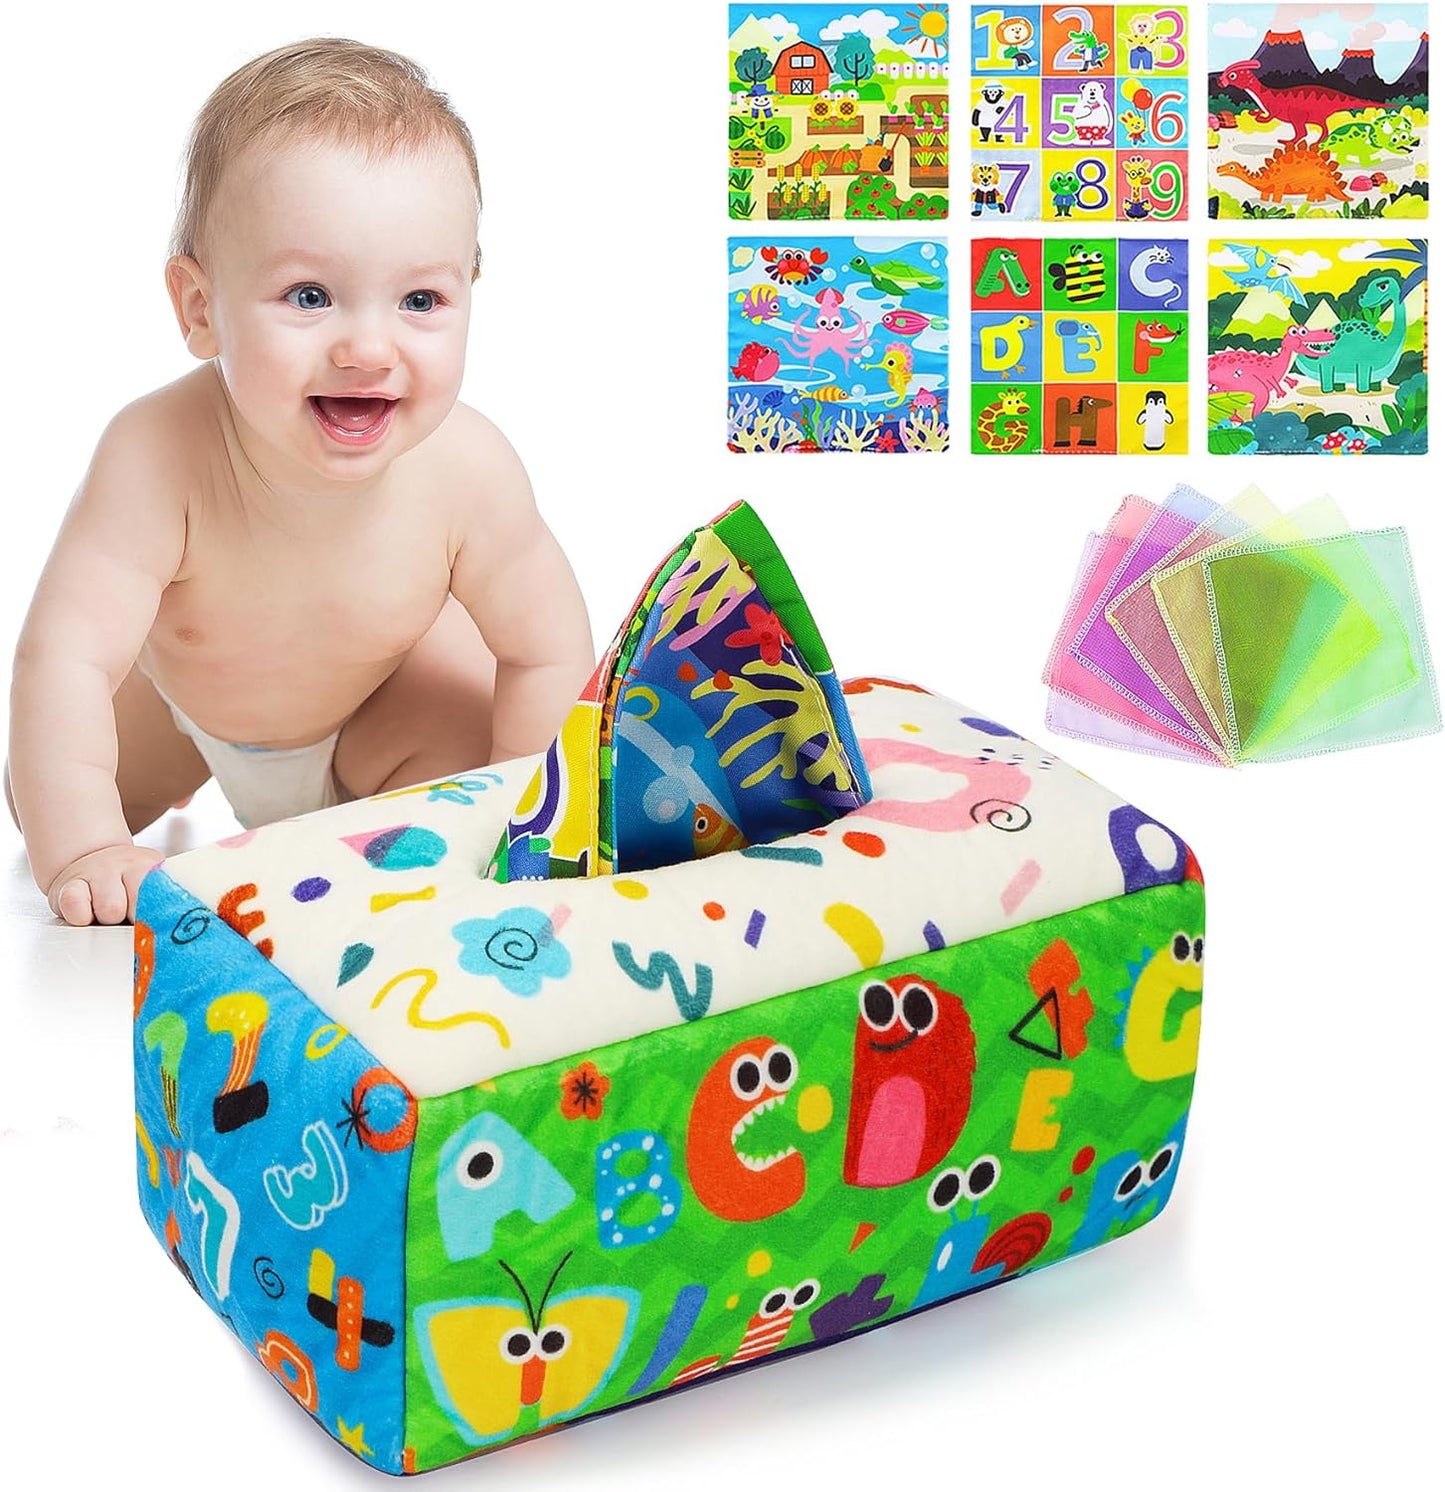 New Baby Toys 6-12 Months, Baby Tissue Box Toy, Montessori Toys for Babies, Toys for 1 Year Old Boy Girl, Soft Crinkle Sensory Toys for Infant Toddlers, Stocking Stuffers, Baby Boy Girl Gifts